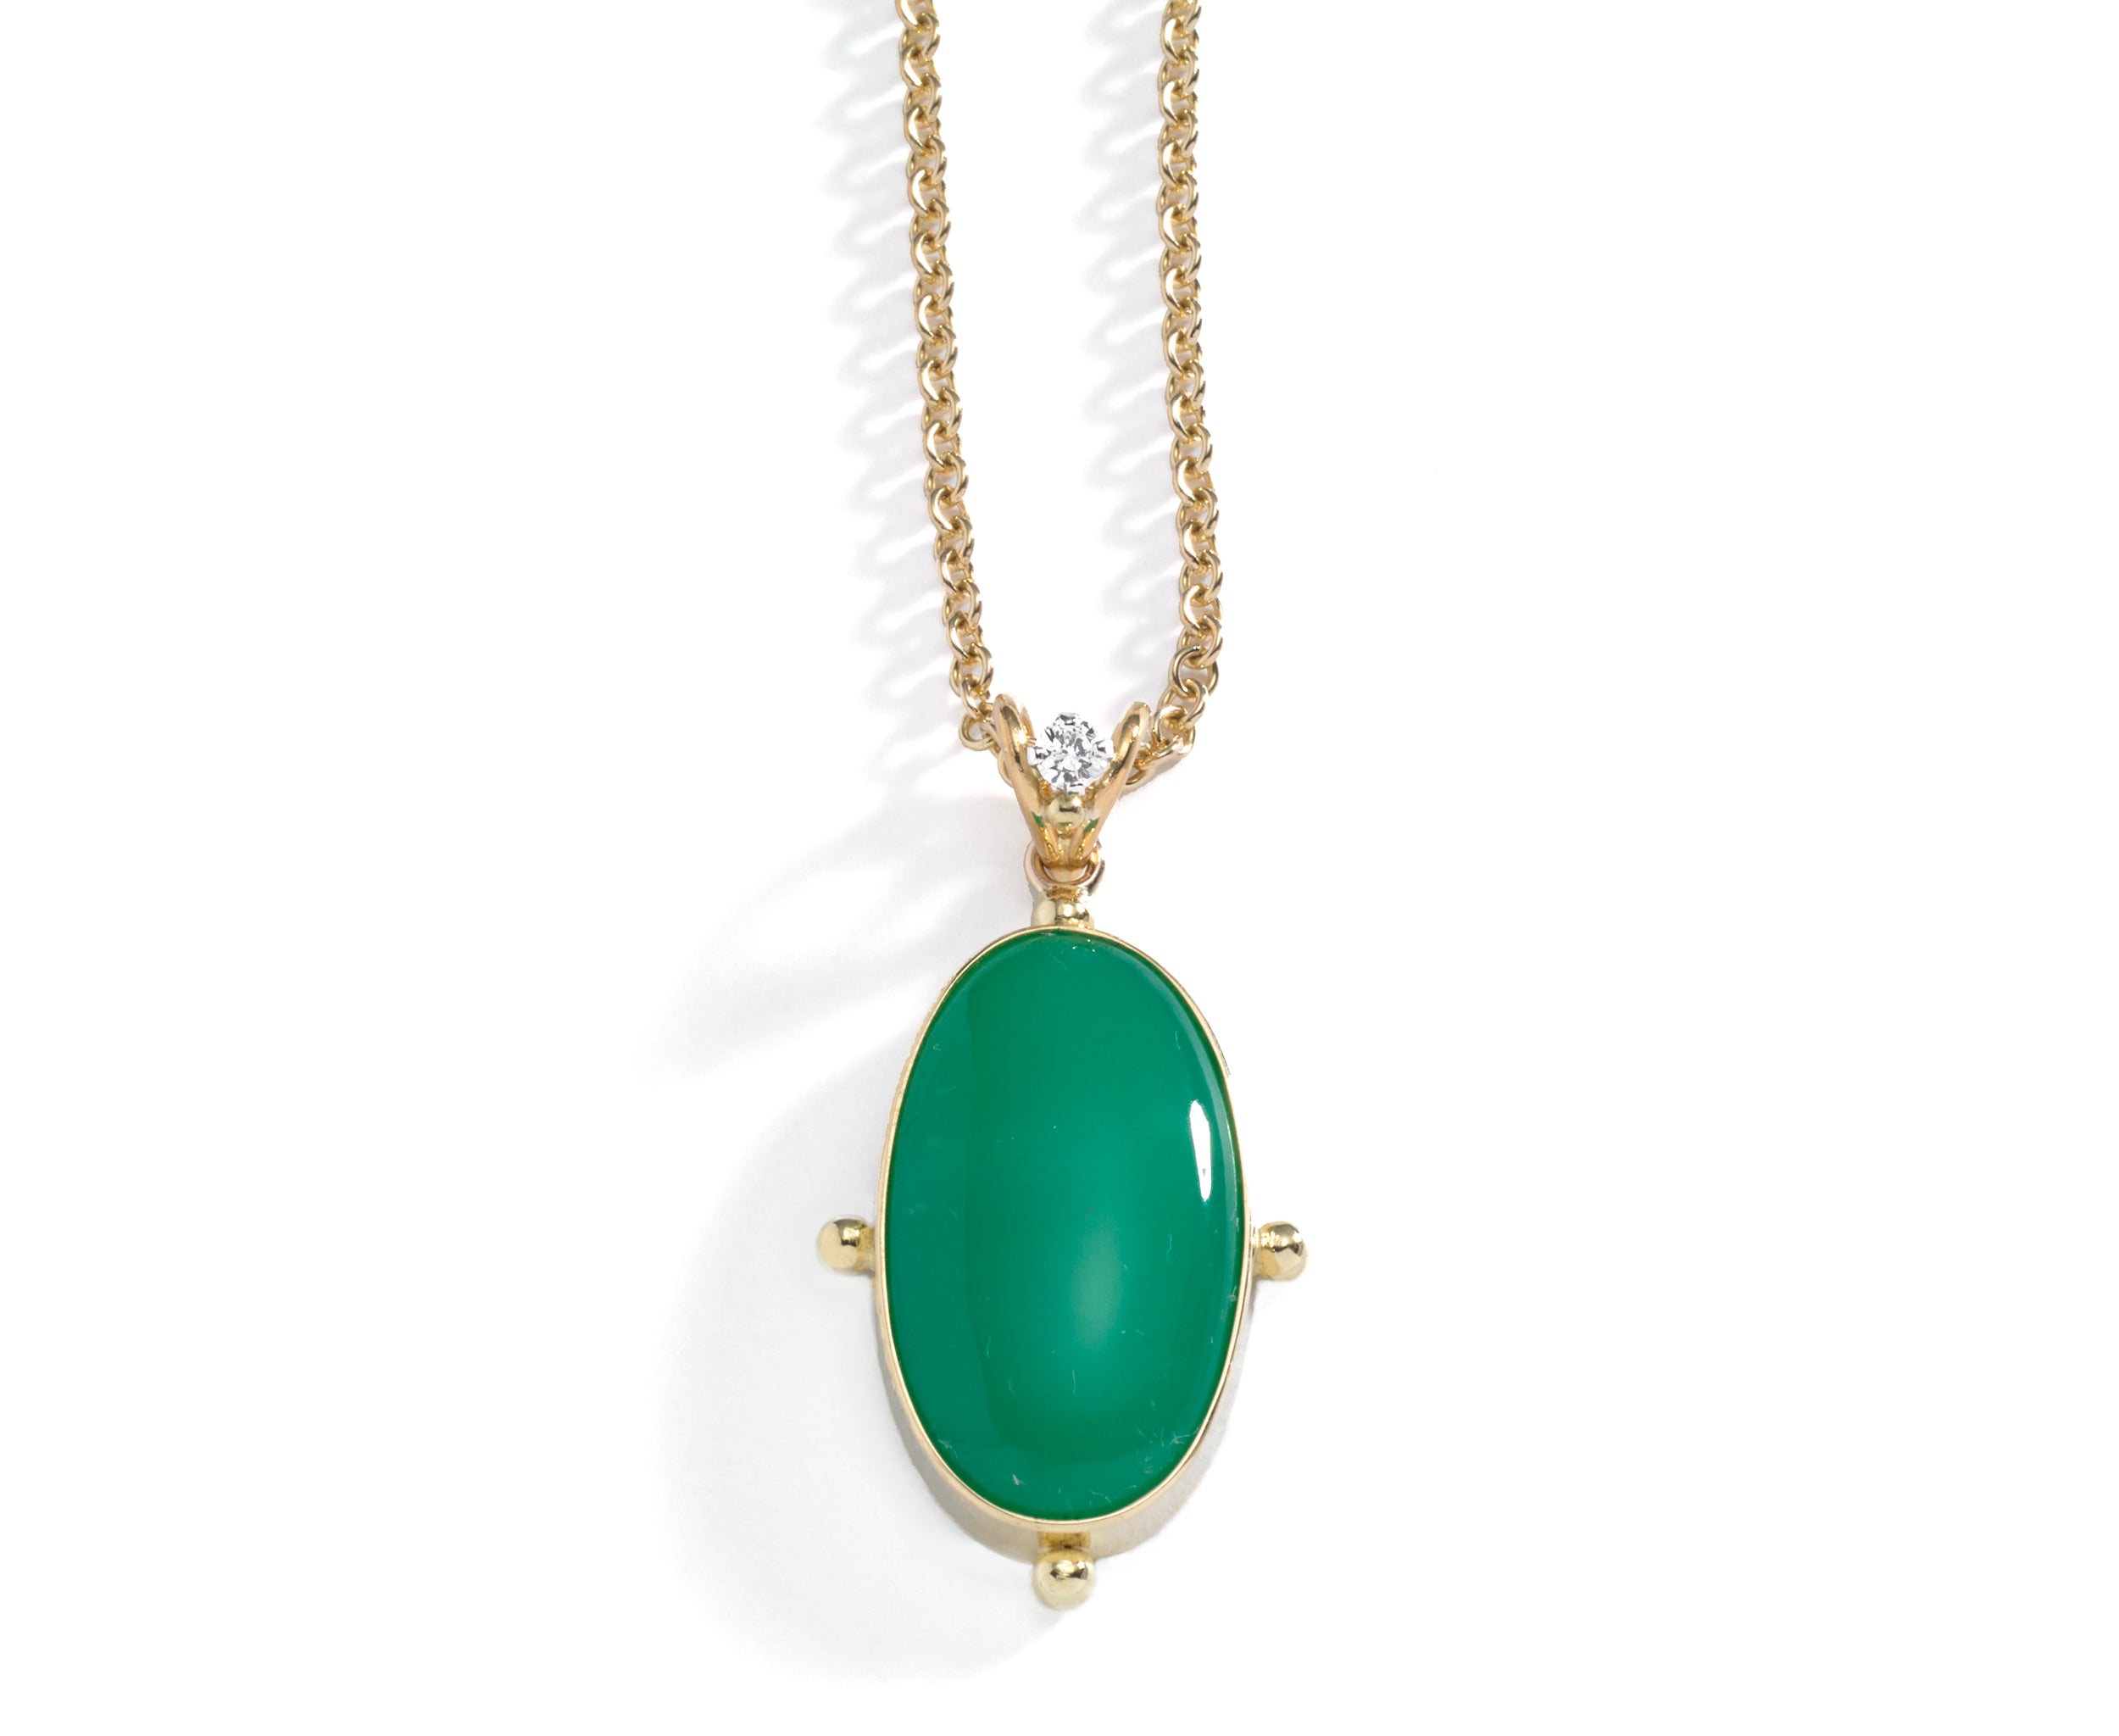 Chrysoprase and 18k Gold Handmade Necklace